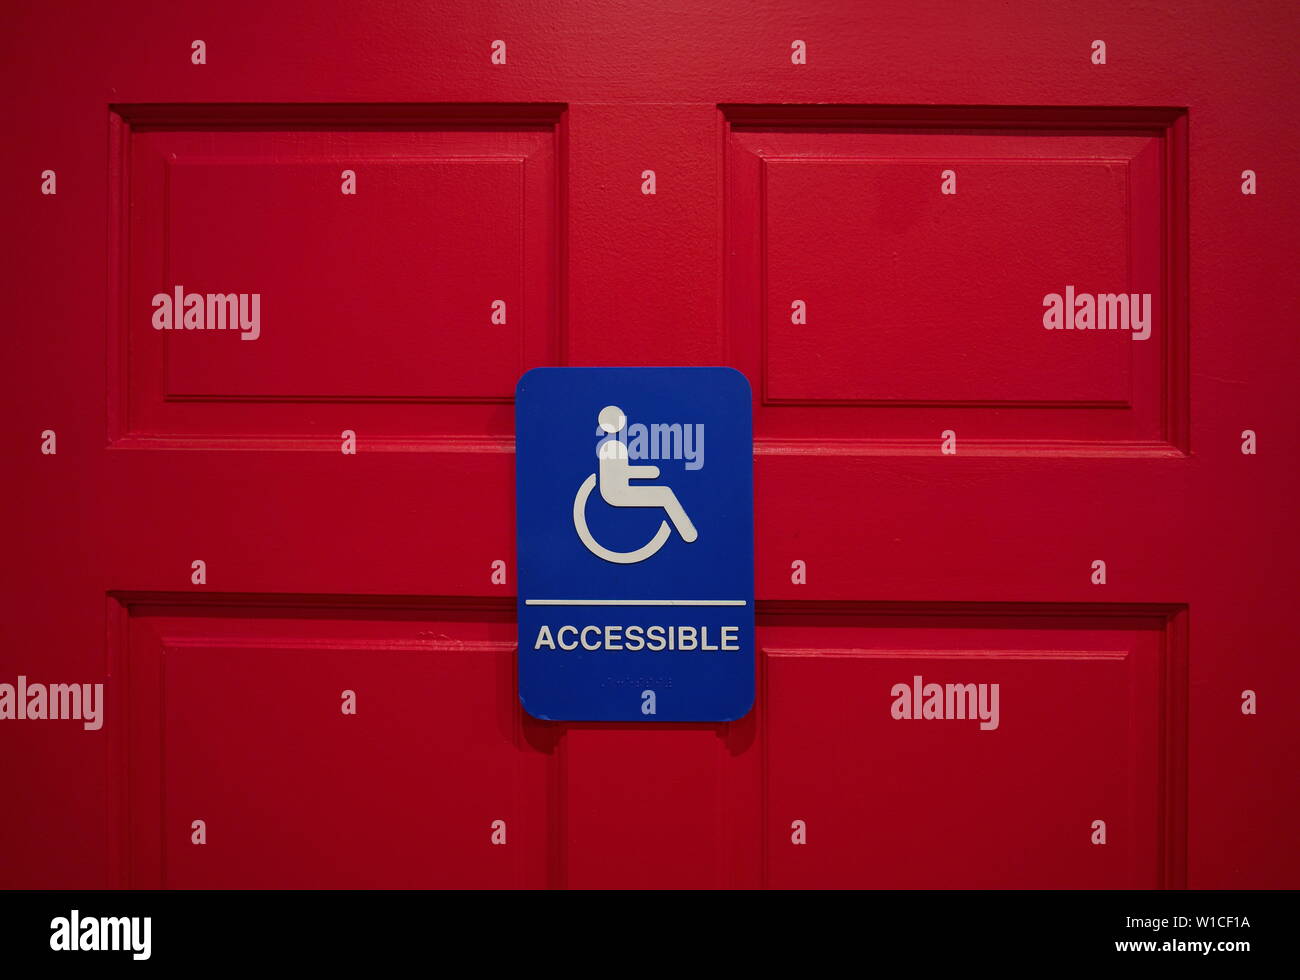 A blue handicap sign or marker mounted on a deep red restroom door. Stock Photo